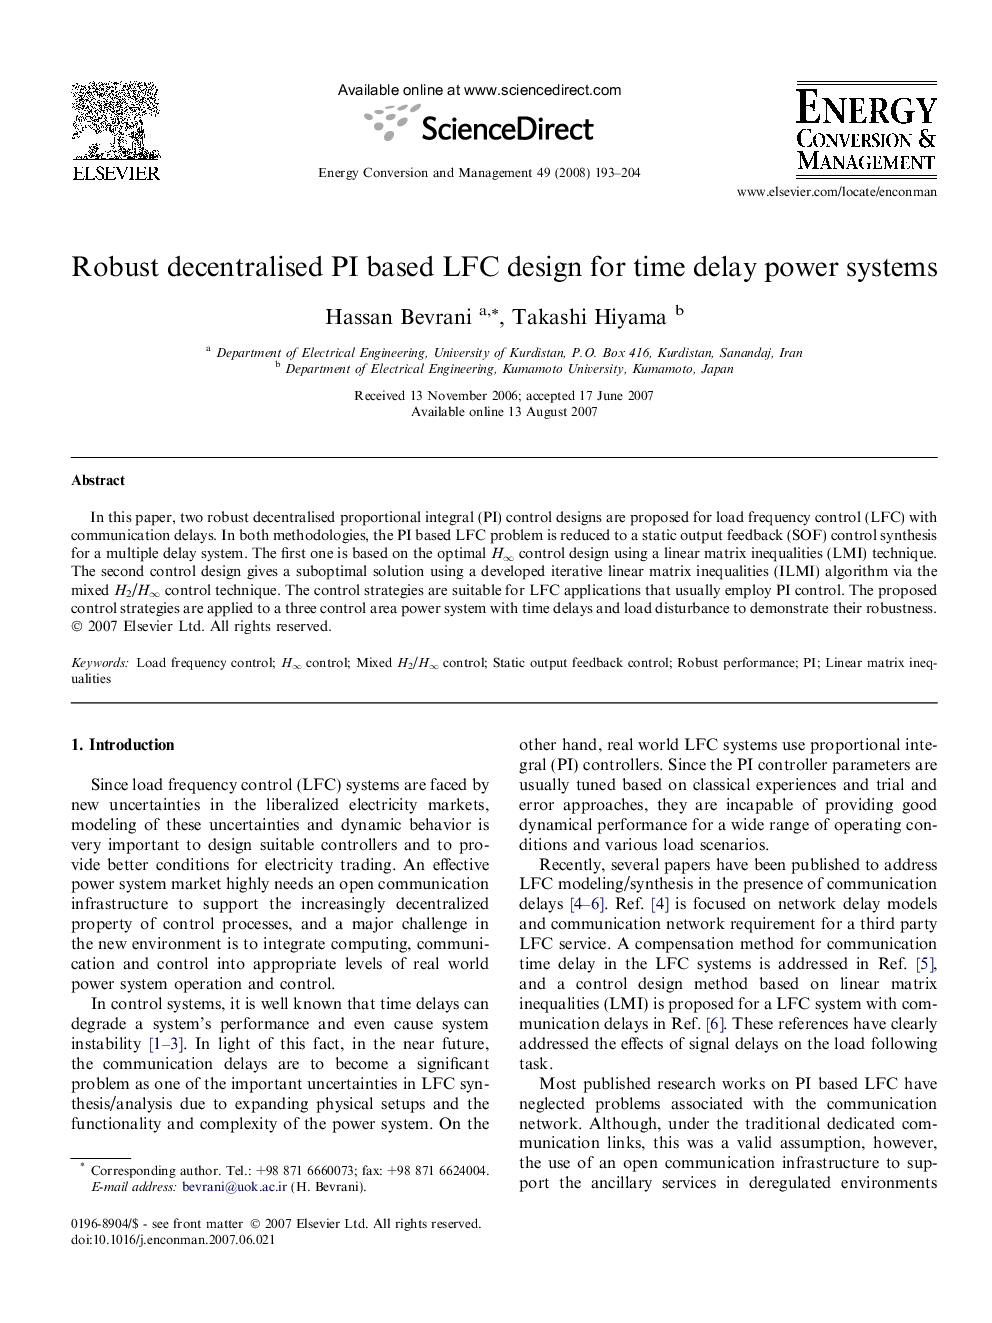 Robust decentralised PI based LFC design for time delay power systems